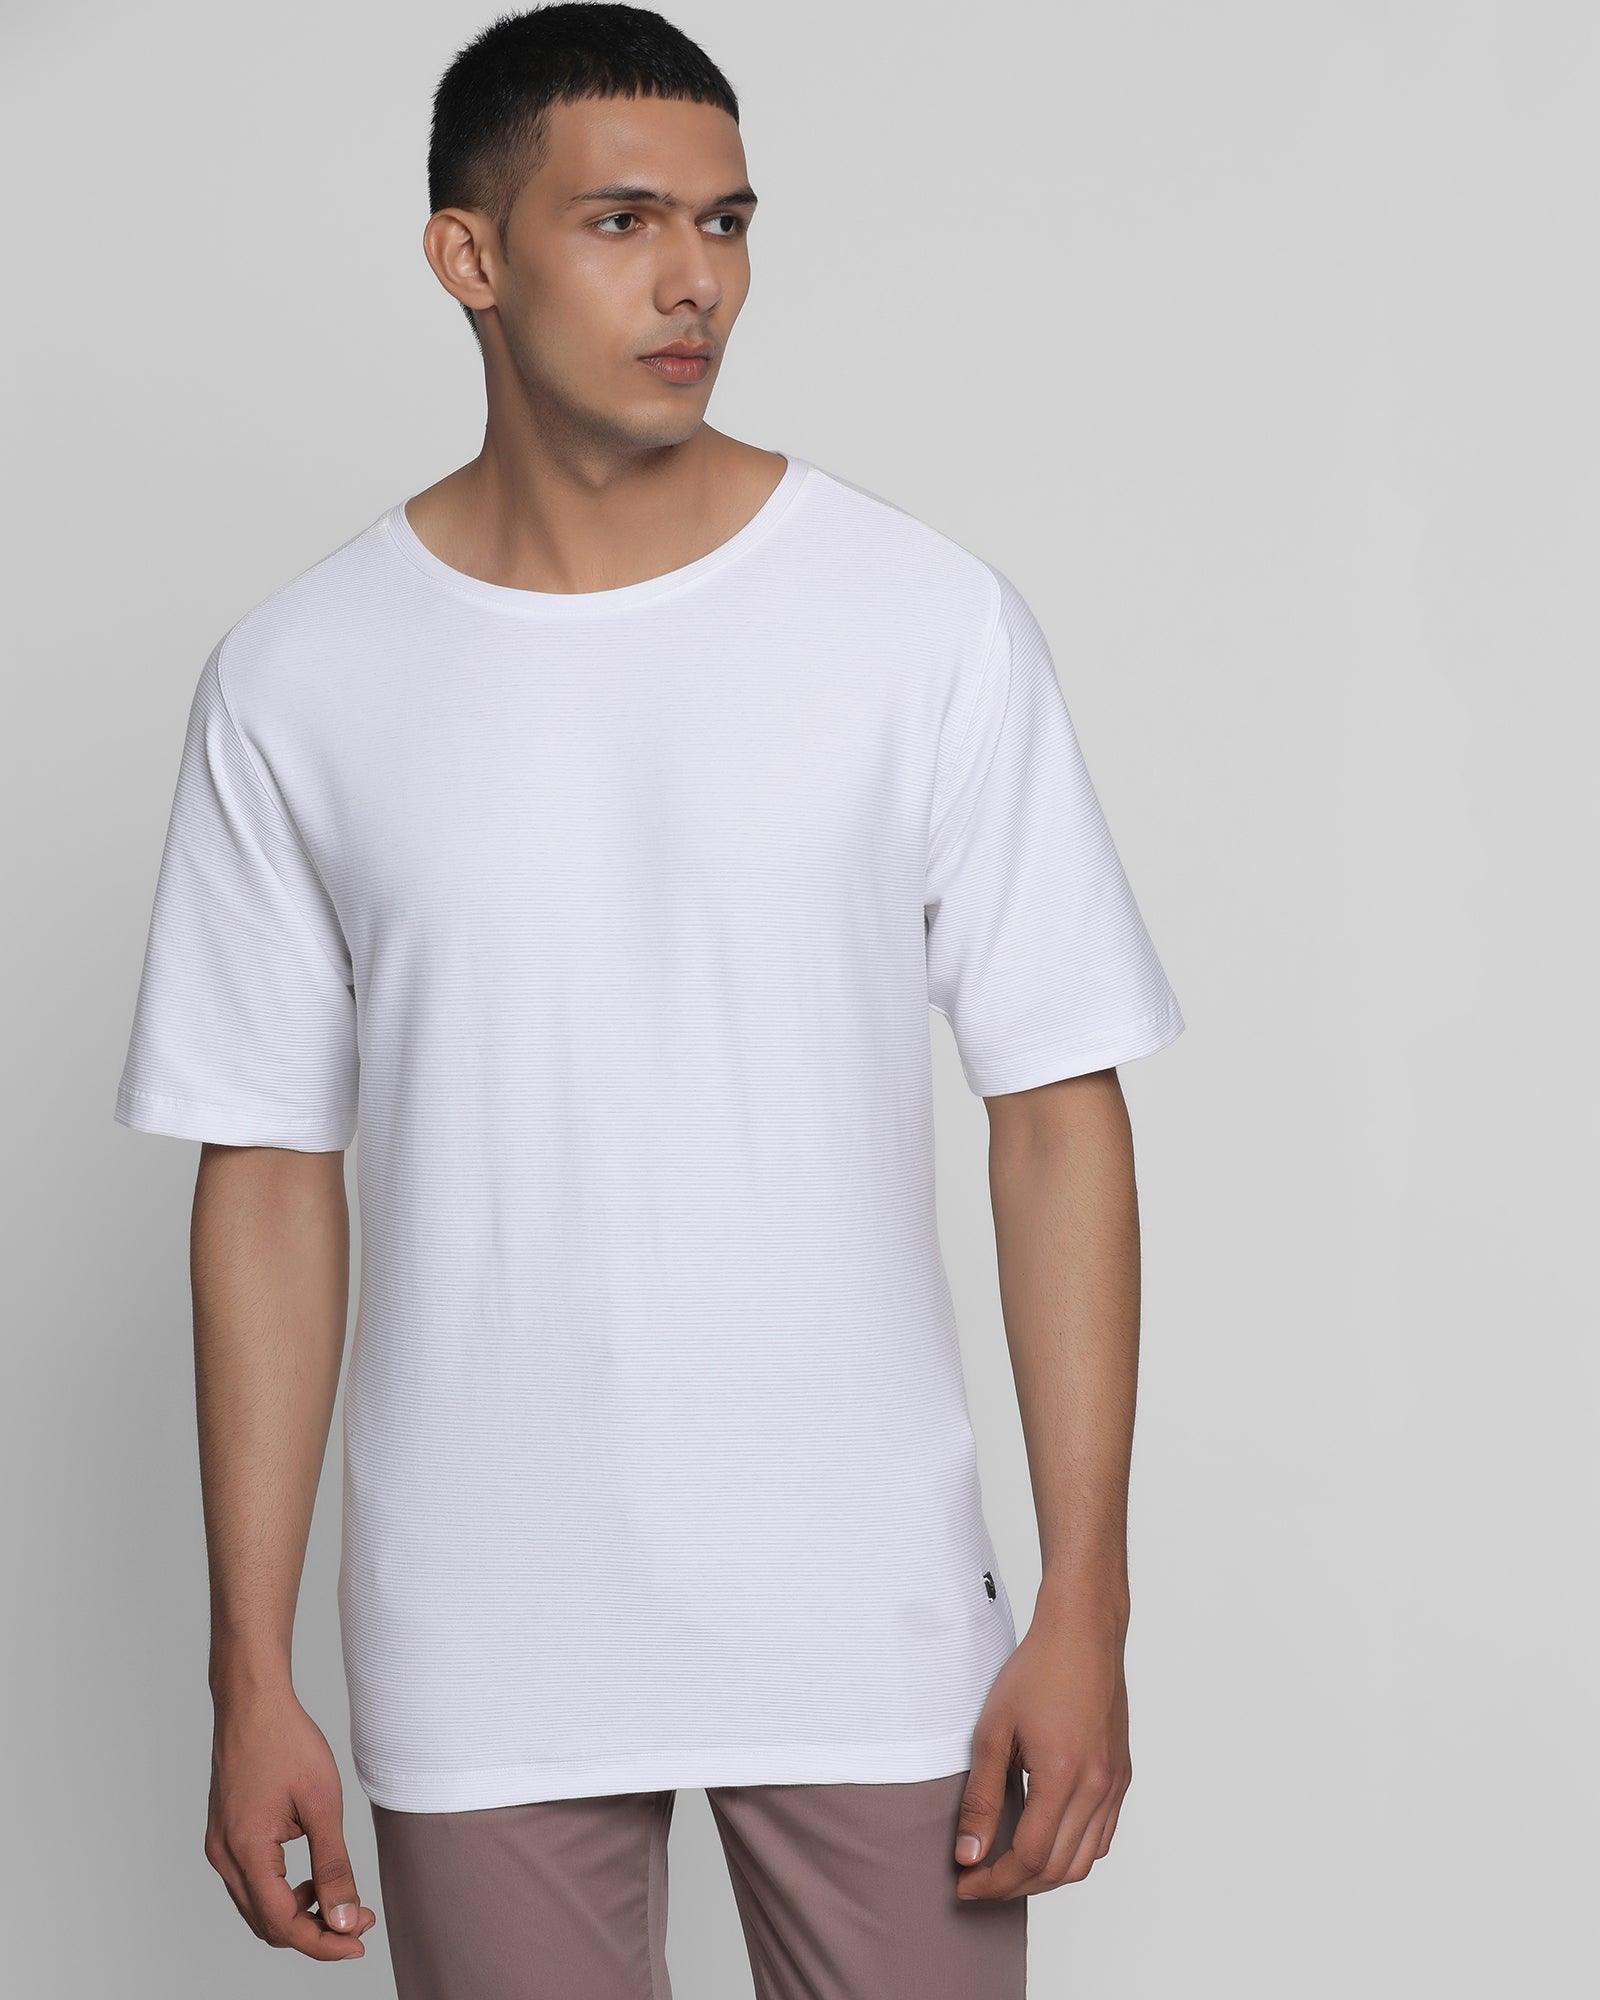 Crew Neck White Solid T Shirt - Wall